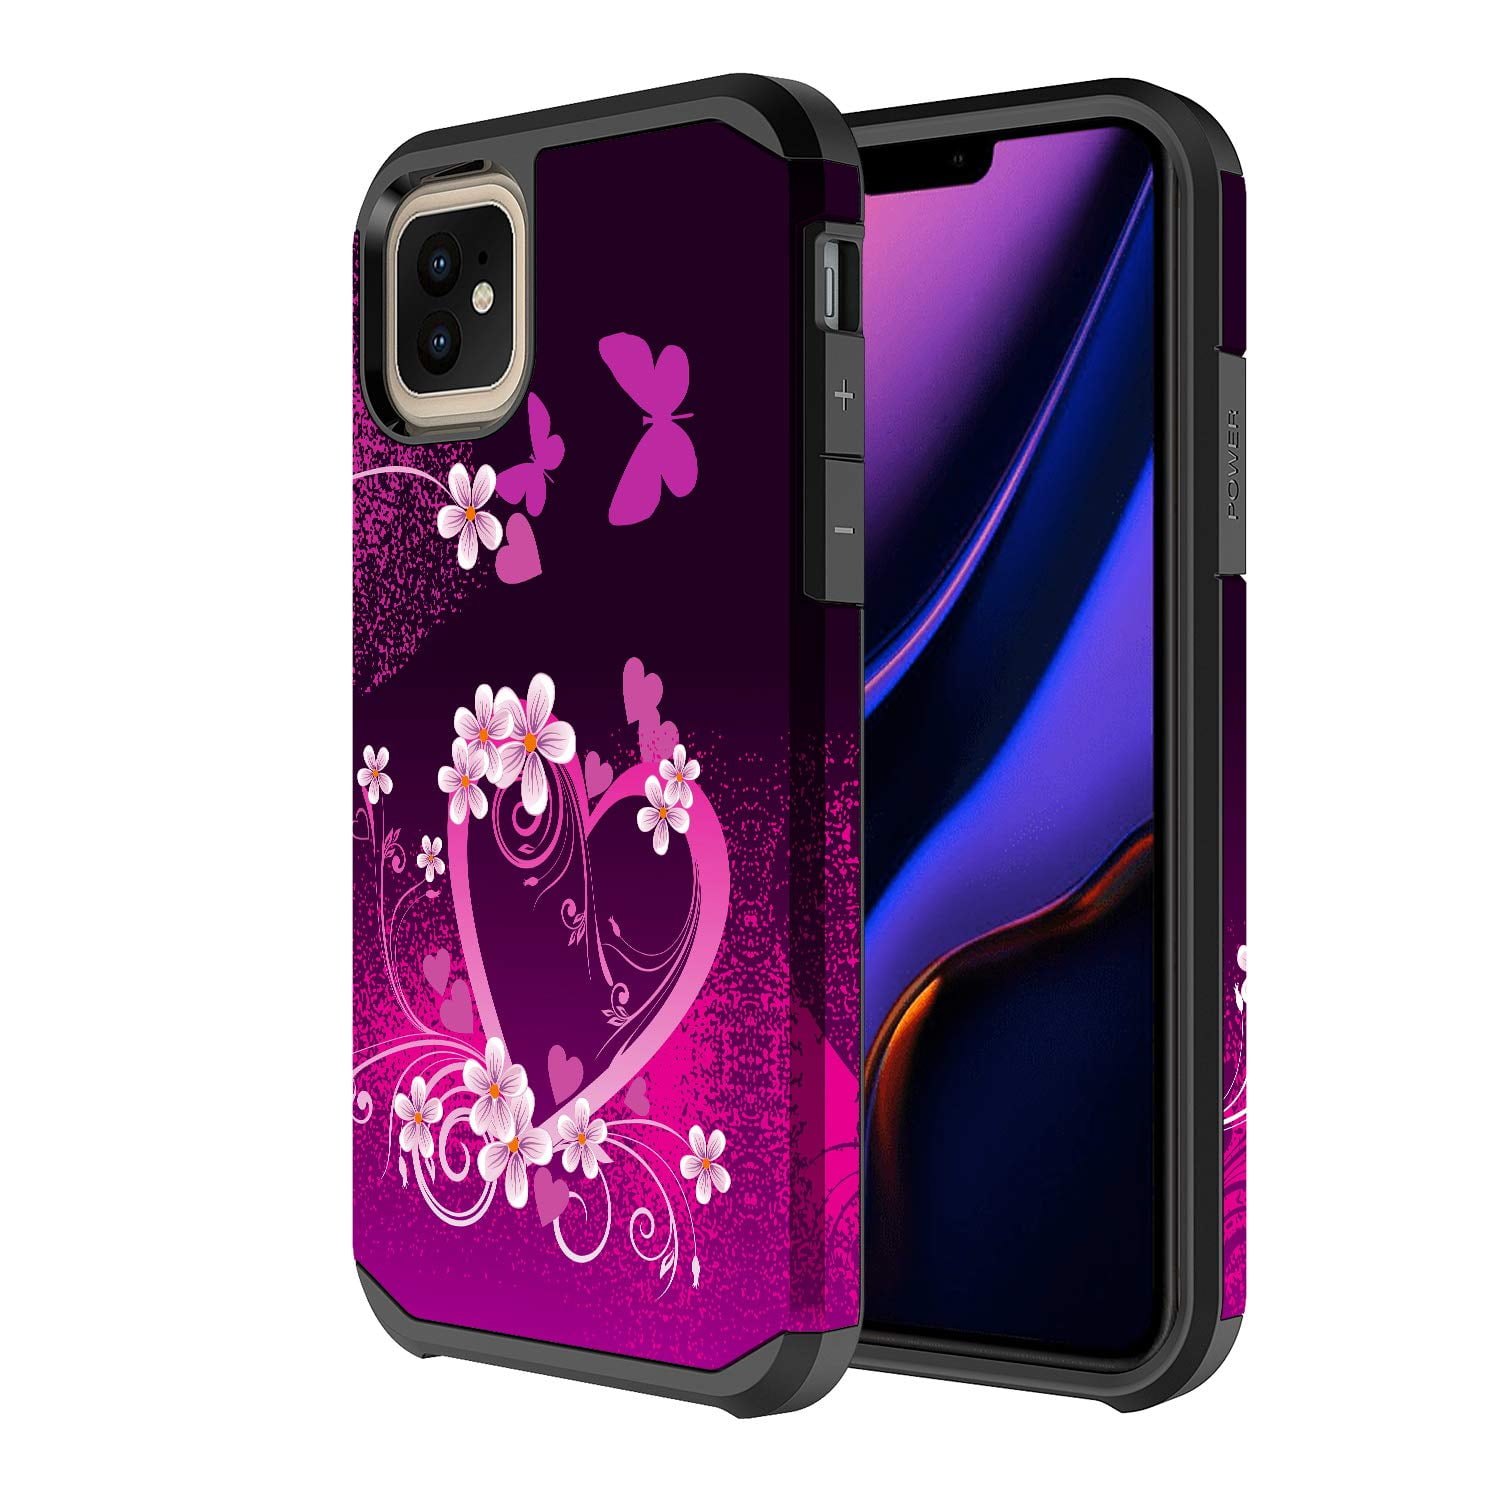 Iphone 11 Pro Max Case Cute Girls Women Dual Layer Heavy Duty Protective Phone Cover Case W Tempered Glass Screen Protector For Nbsp Apple Iphone 11 Pro Max 6 5inch Hot Pink Heart Walmart Com